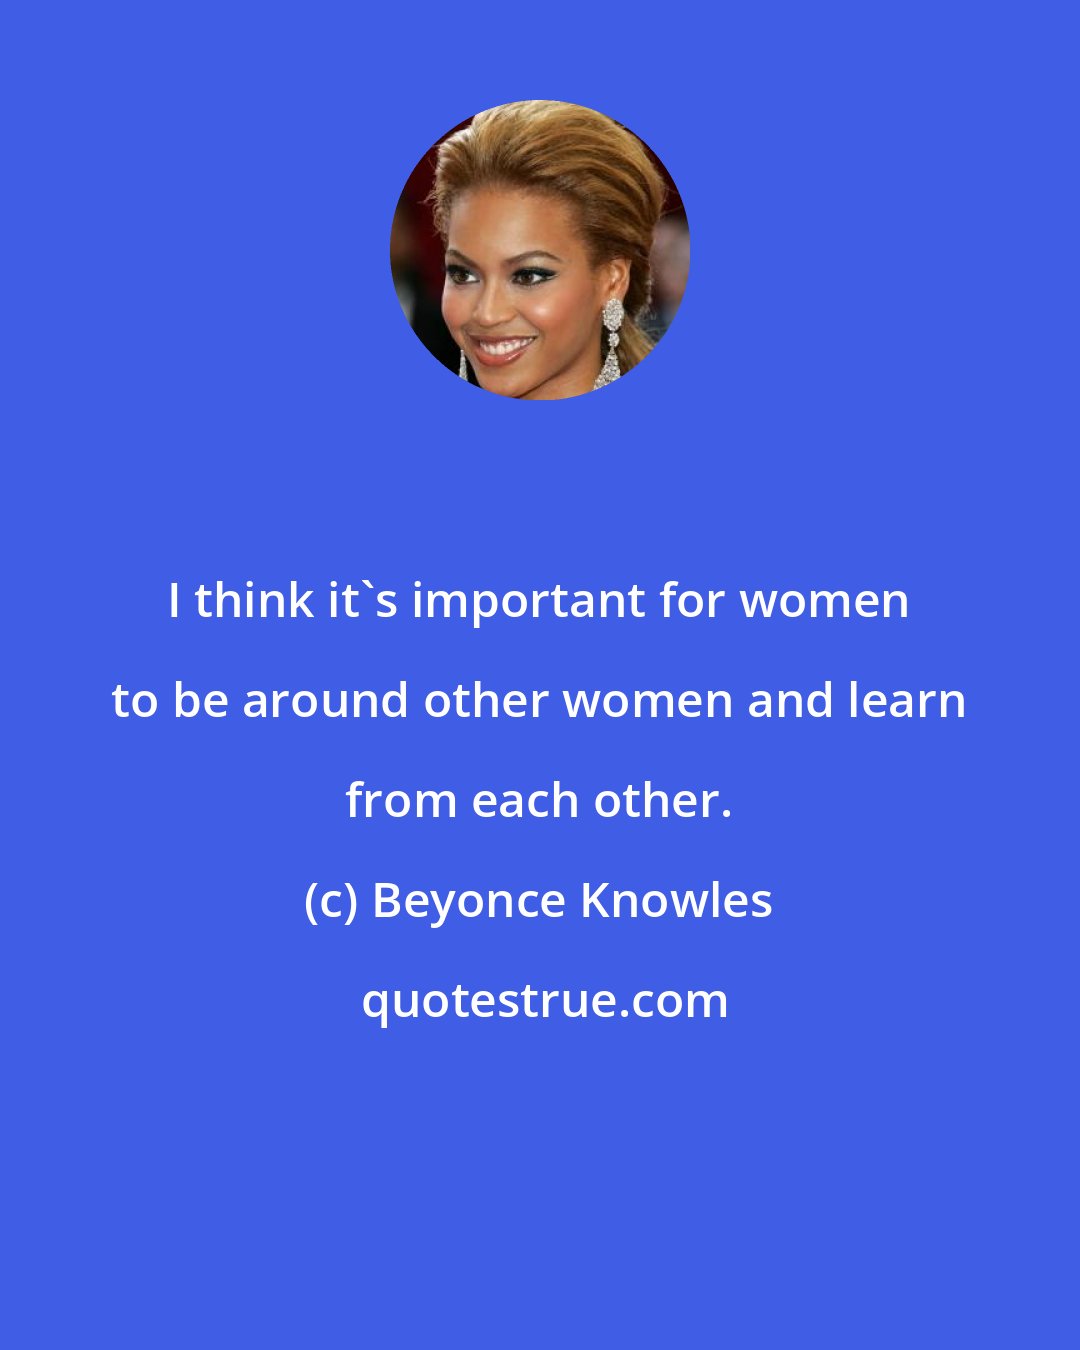 Beyonce Knowles: I think it's important for women to be around other women and learn from each other.